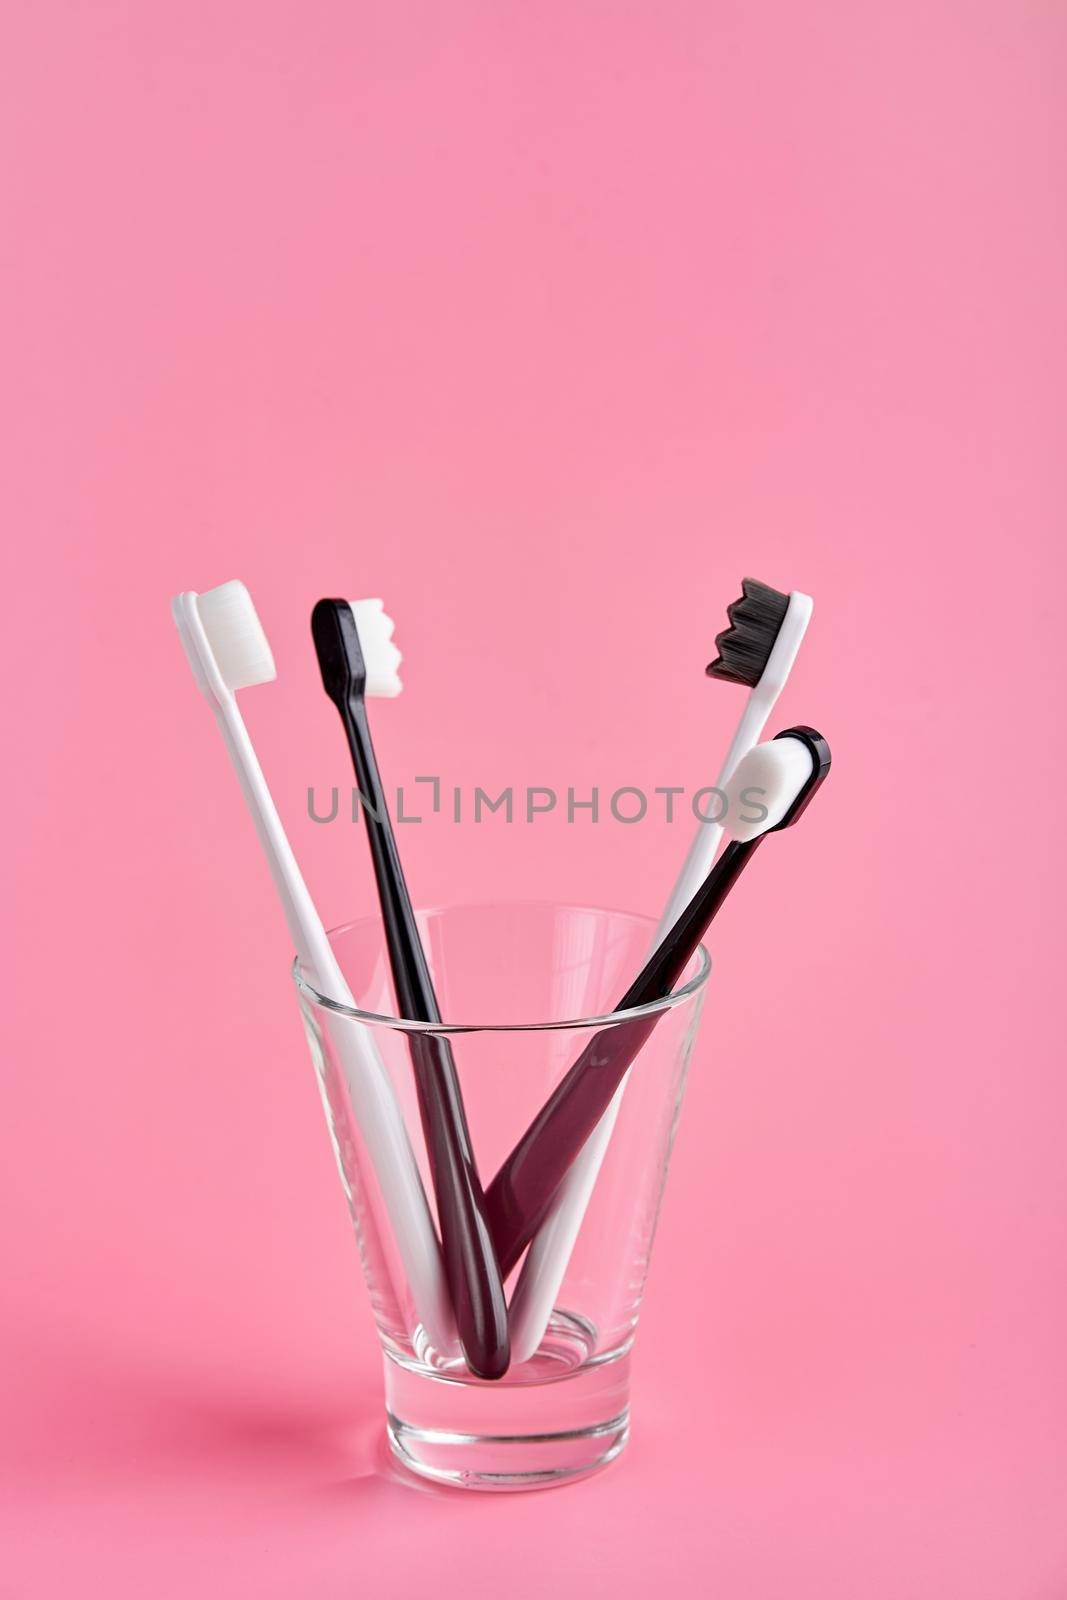 Fashionable toothbrush with soft bristles. Popular toothbrushes. Hygiene trends. Kit of toothbrushes in glass on pink background by Try_my_best